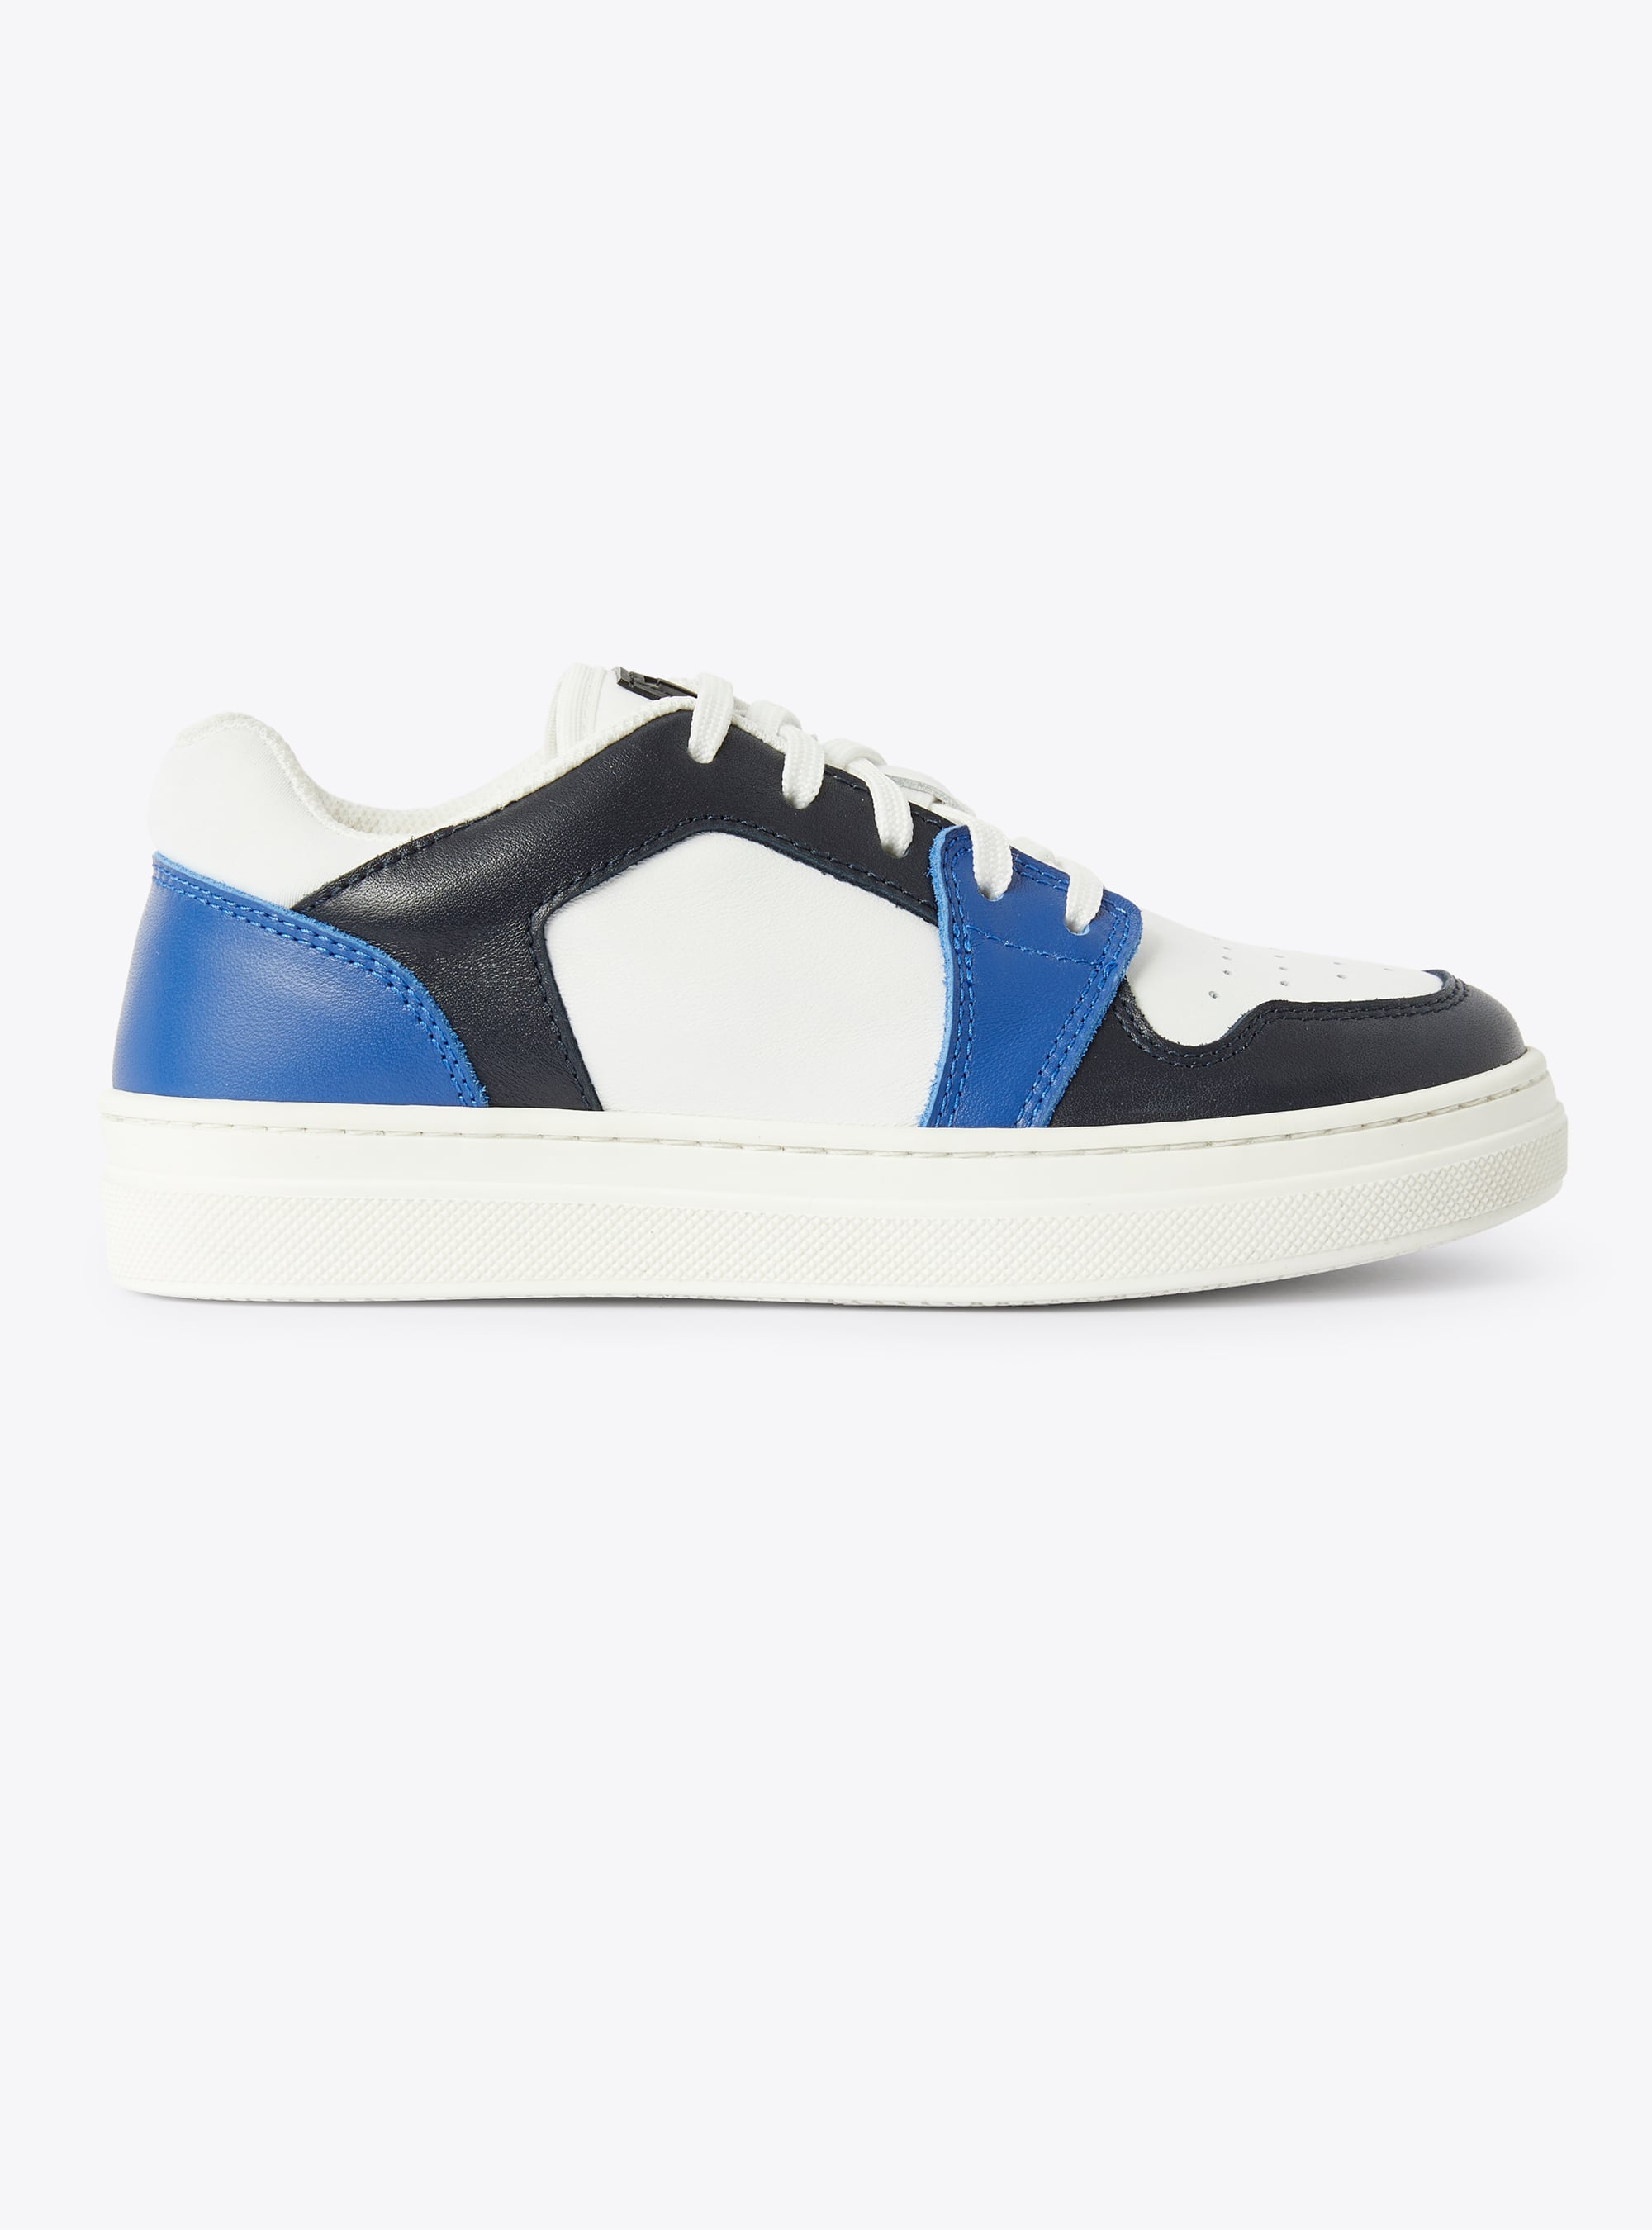 Low-top two-tone IG sneaker in cobalt and dark blue - Blue | Il Gufo